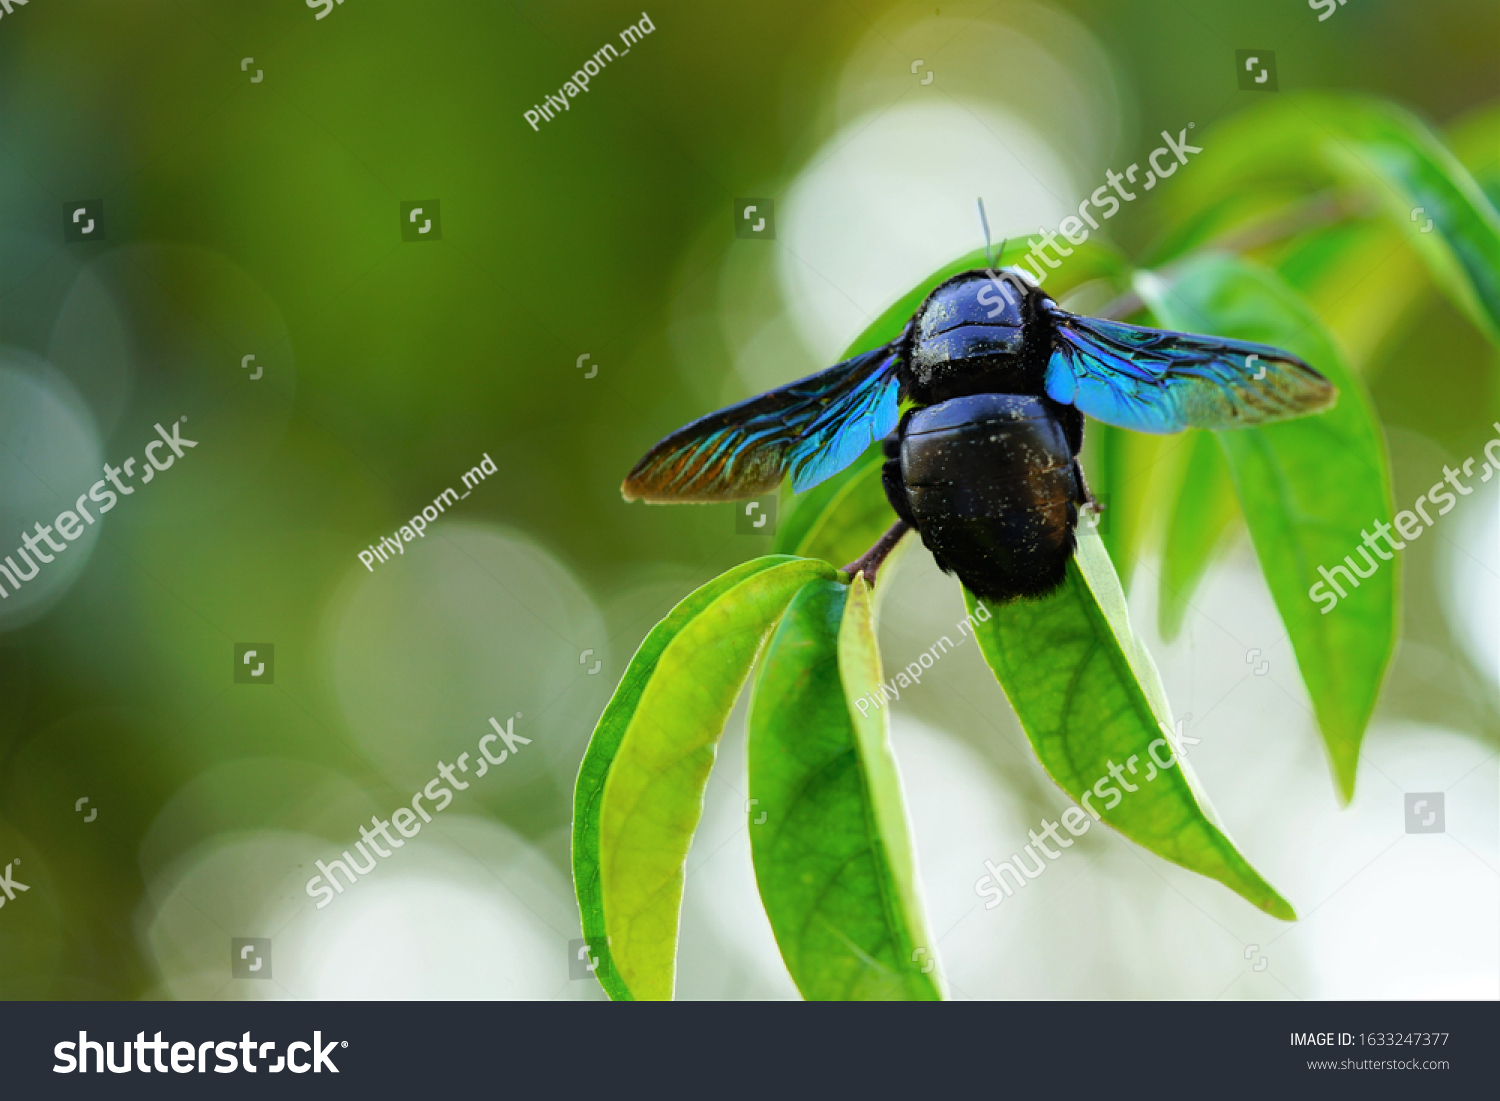 Blue bug with wings